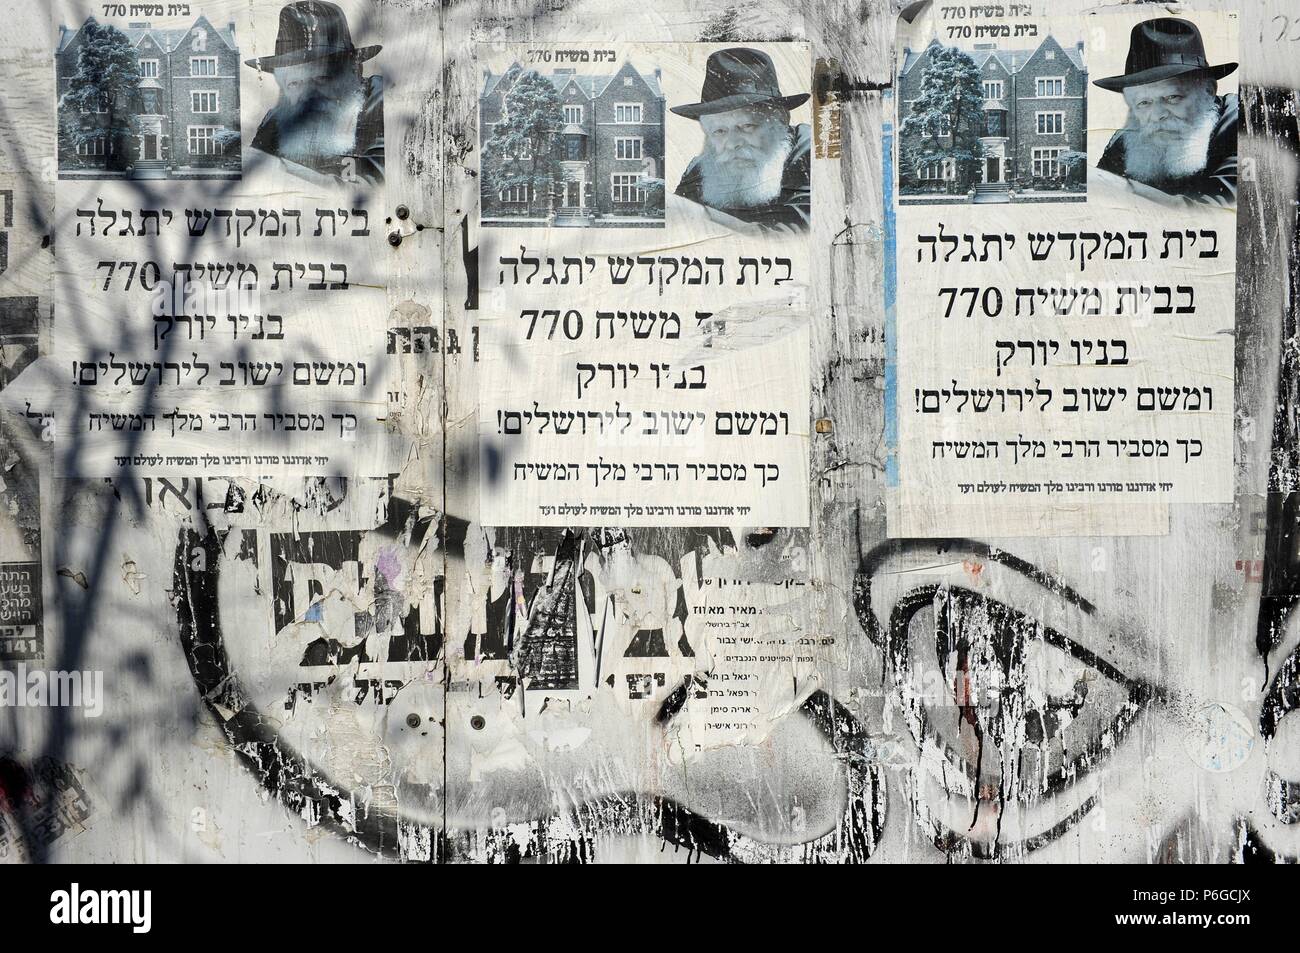 Israel. Jerusalem. Signs in Hebrew in a wall. Stock Photo